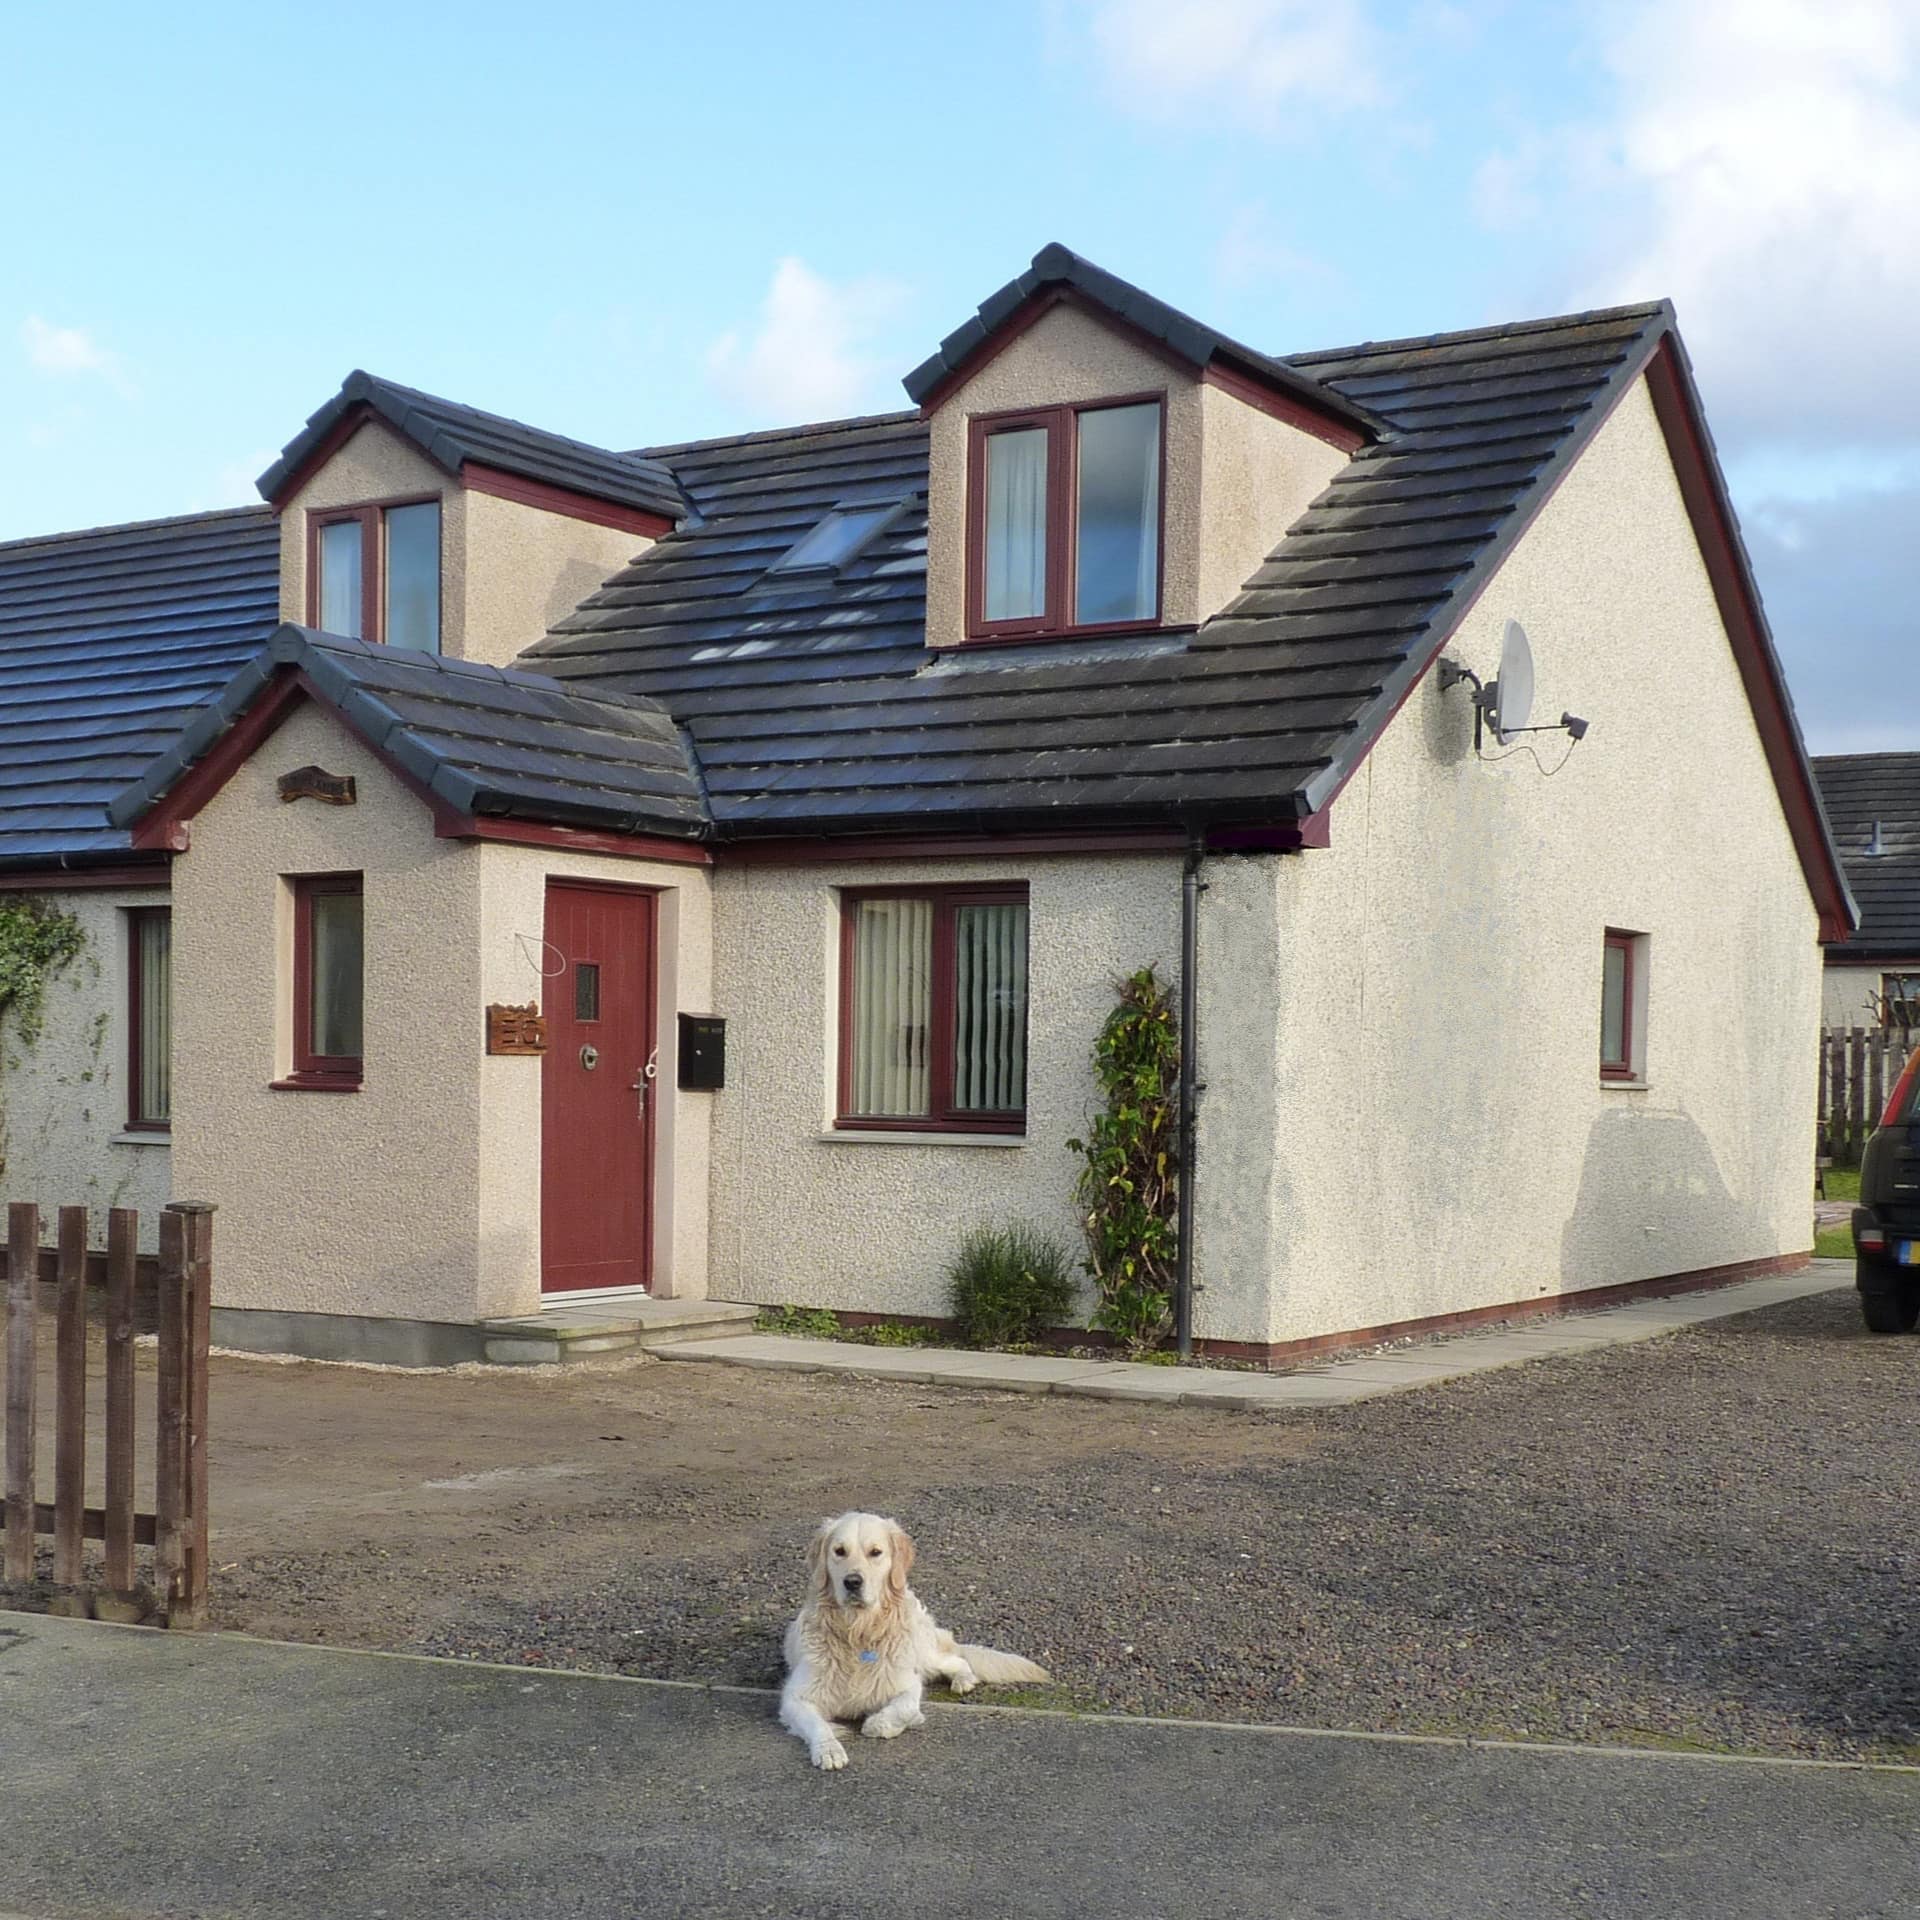 A furry white dog sitting in front of a modern cottage rental